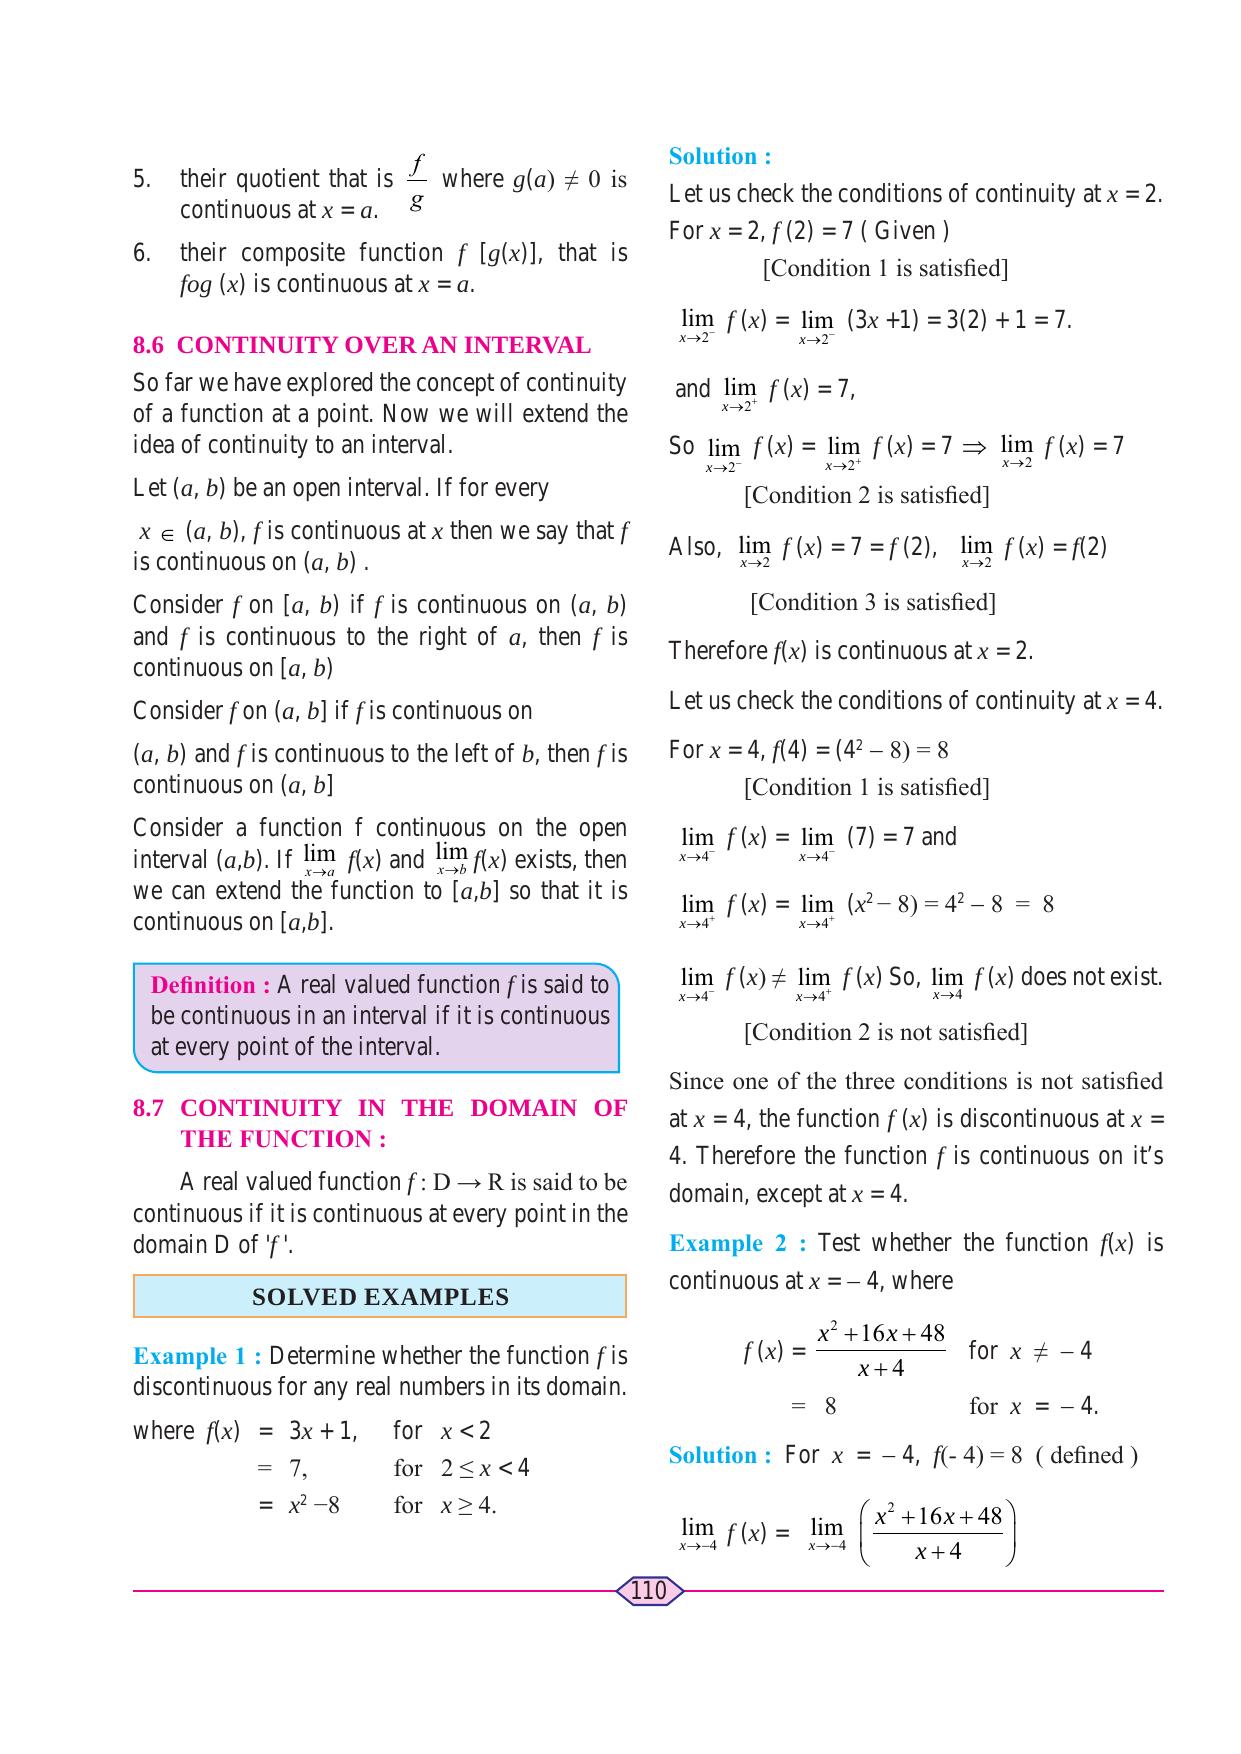 Maharashtra Board Class 11 Maths (Commerce) (Part 1) Textbook - Page 120